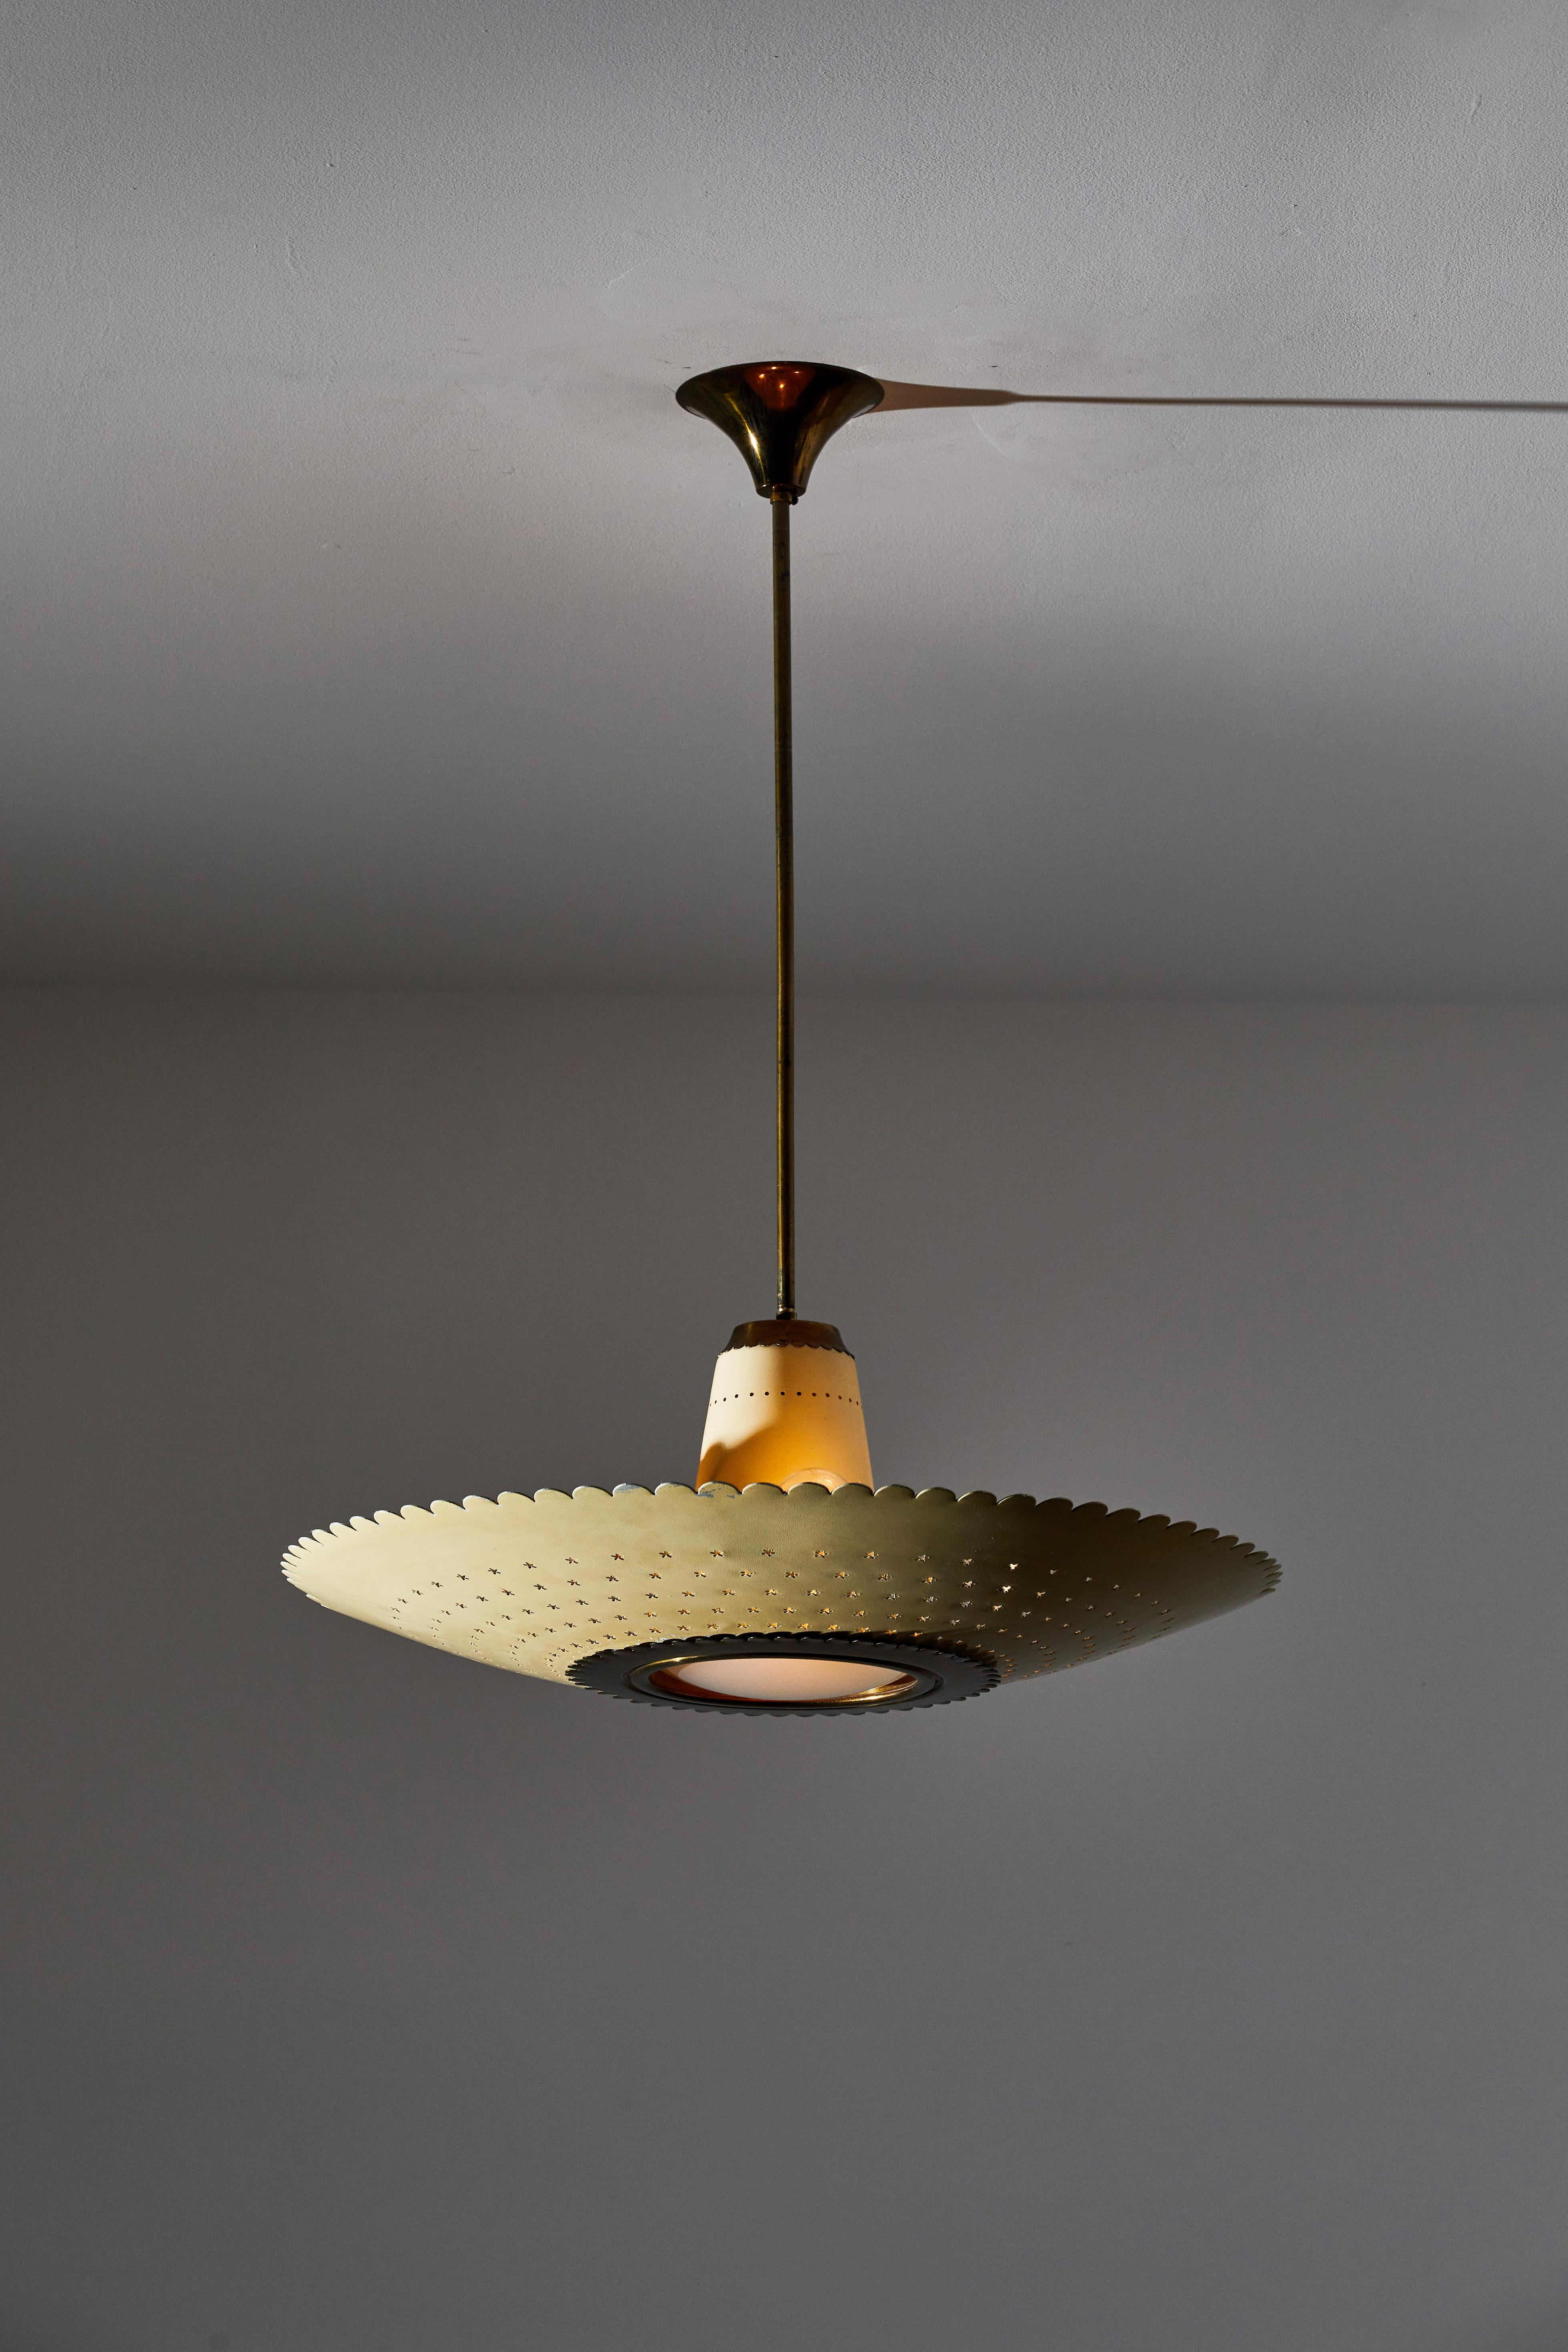 Suspension light by Stilux. Designed and manufactured in Italy, circa 1950s. Lacquered metal and brass, glass lens. Custom brass ceiling plate. Rewired for U.S. standards. We recommend four E14 25w maximum bulbs and one E26 40w maximum bulb. Bulbs